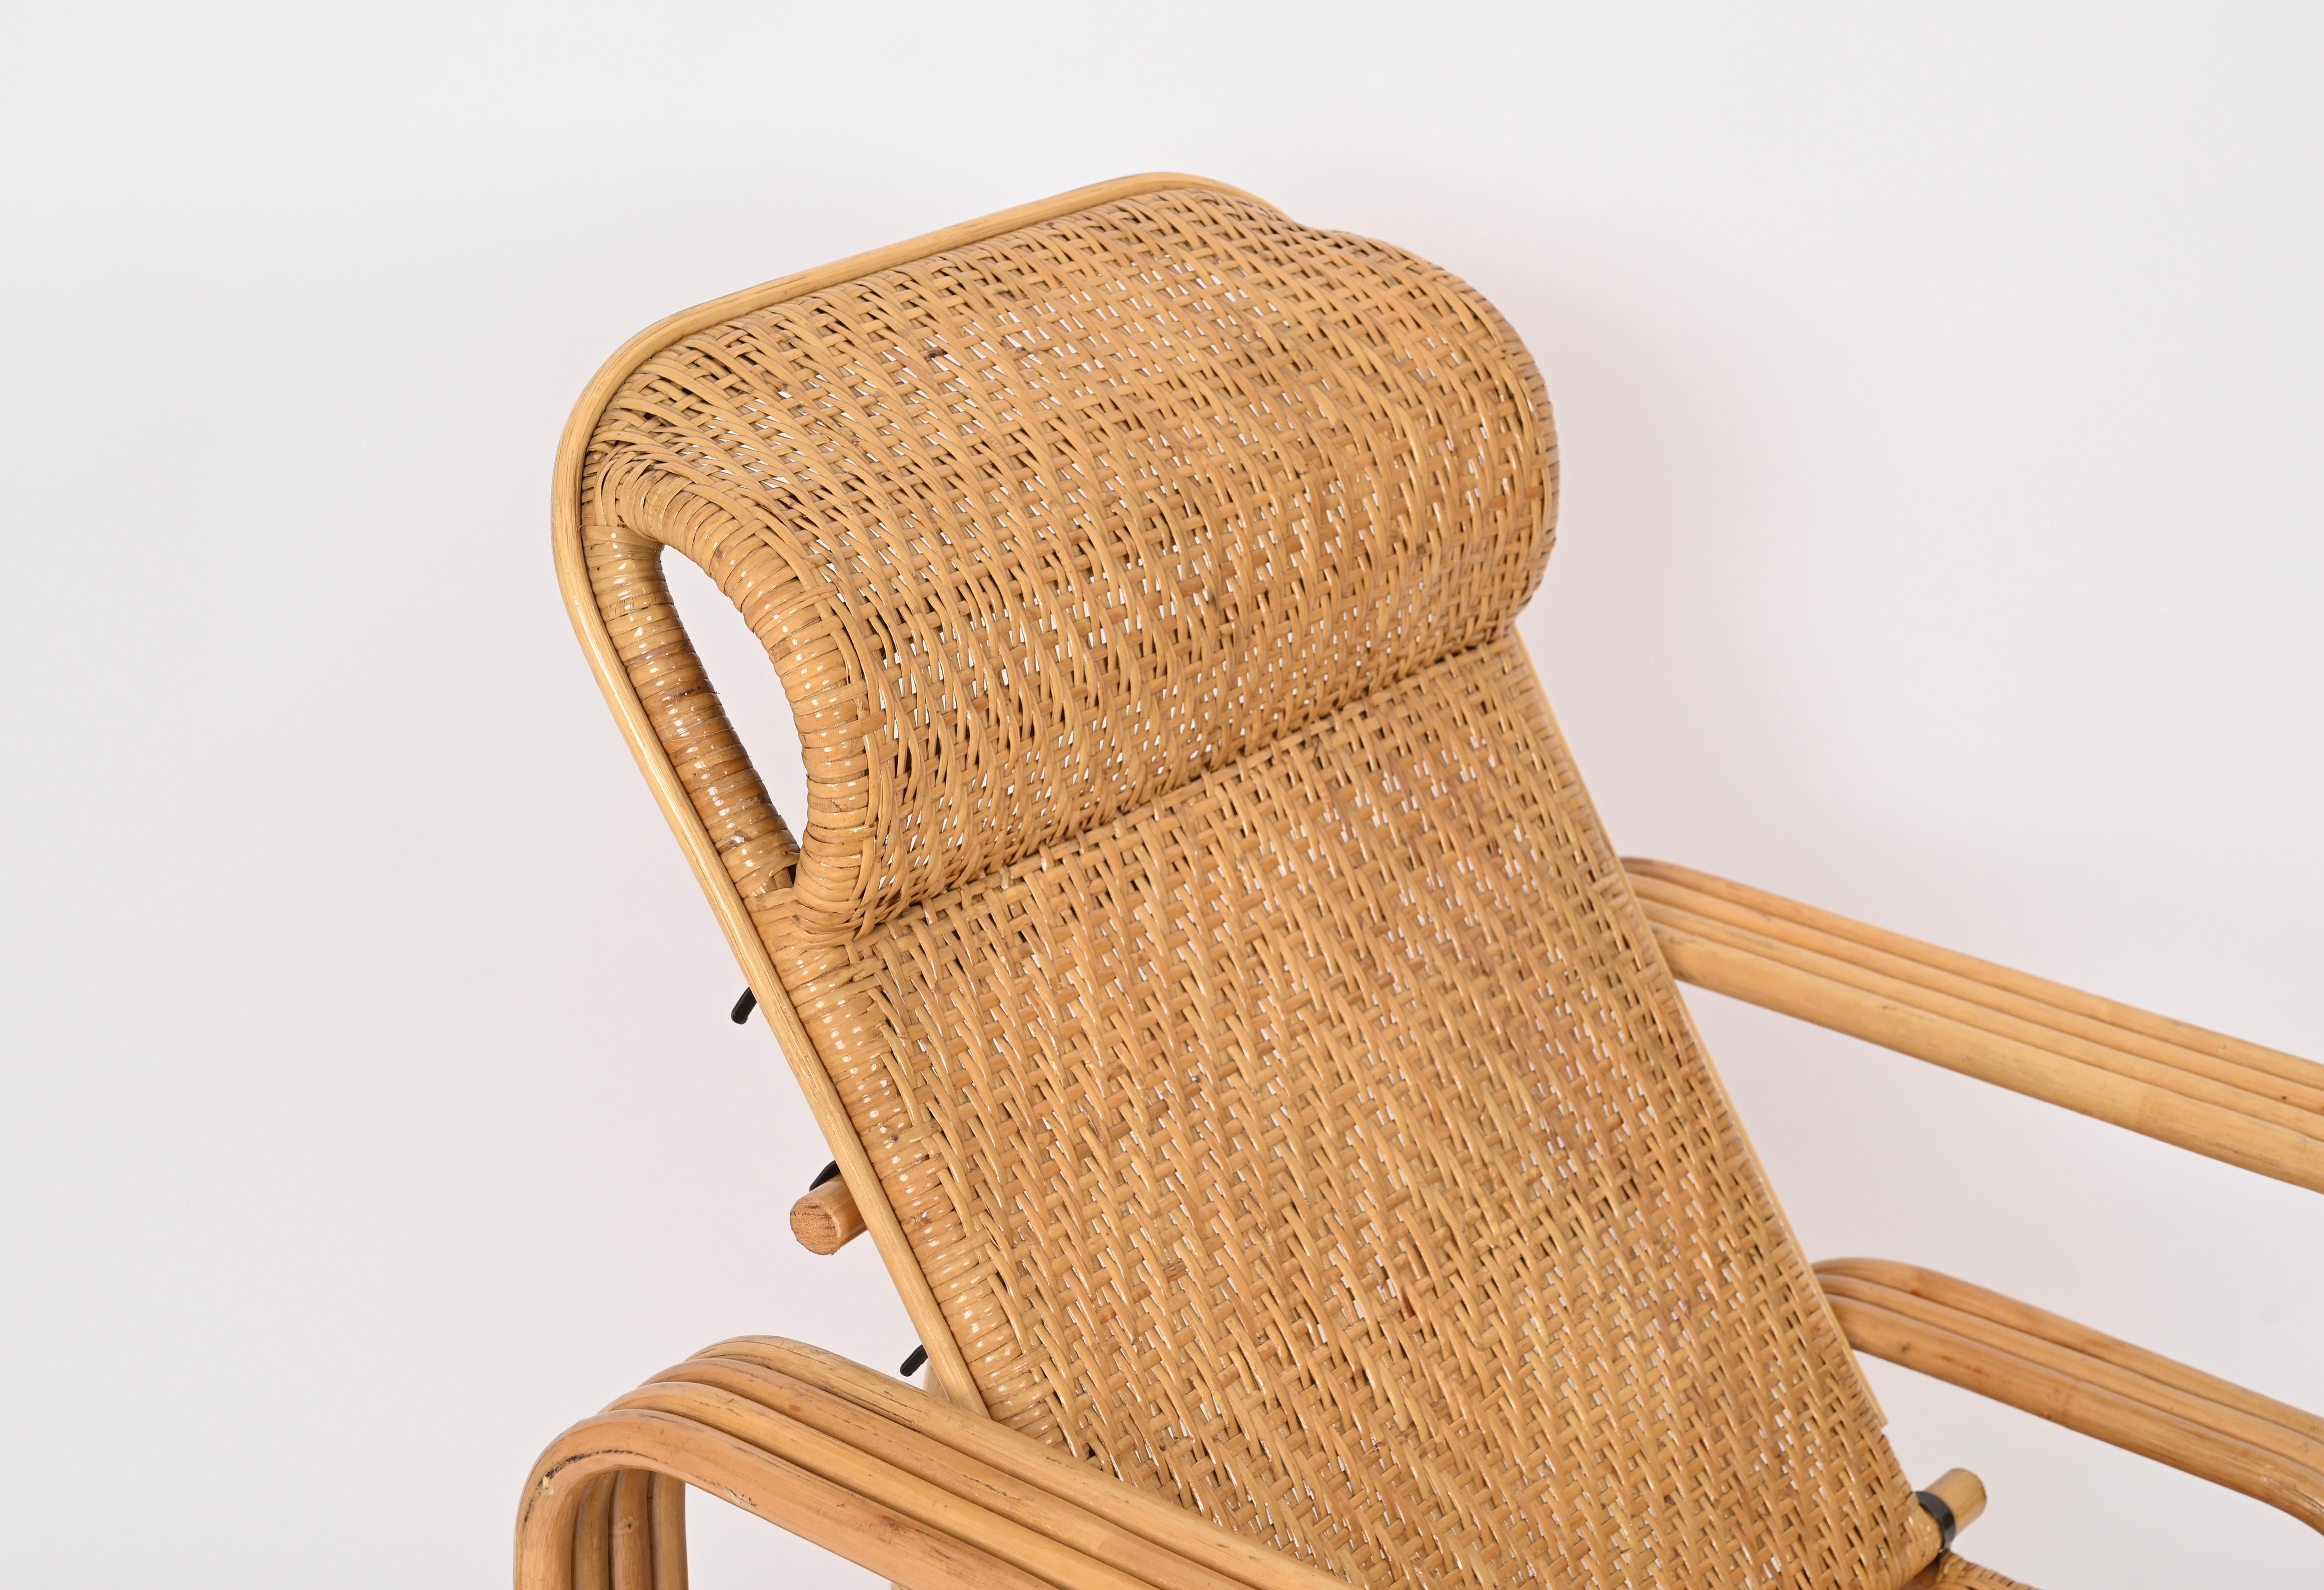 Late 20th Century Adjustable Chaise Longue / Lounge Chair in Woven Wicker and Rattan, Italy 1970s  For Sale